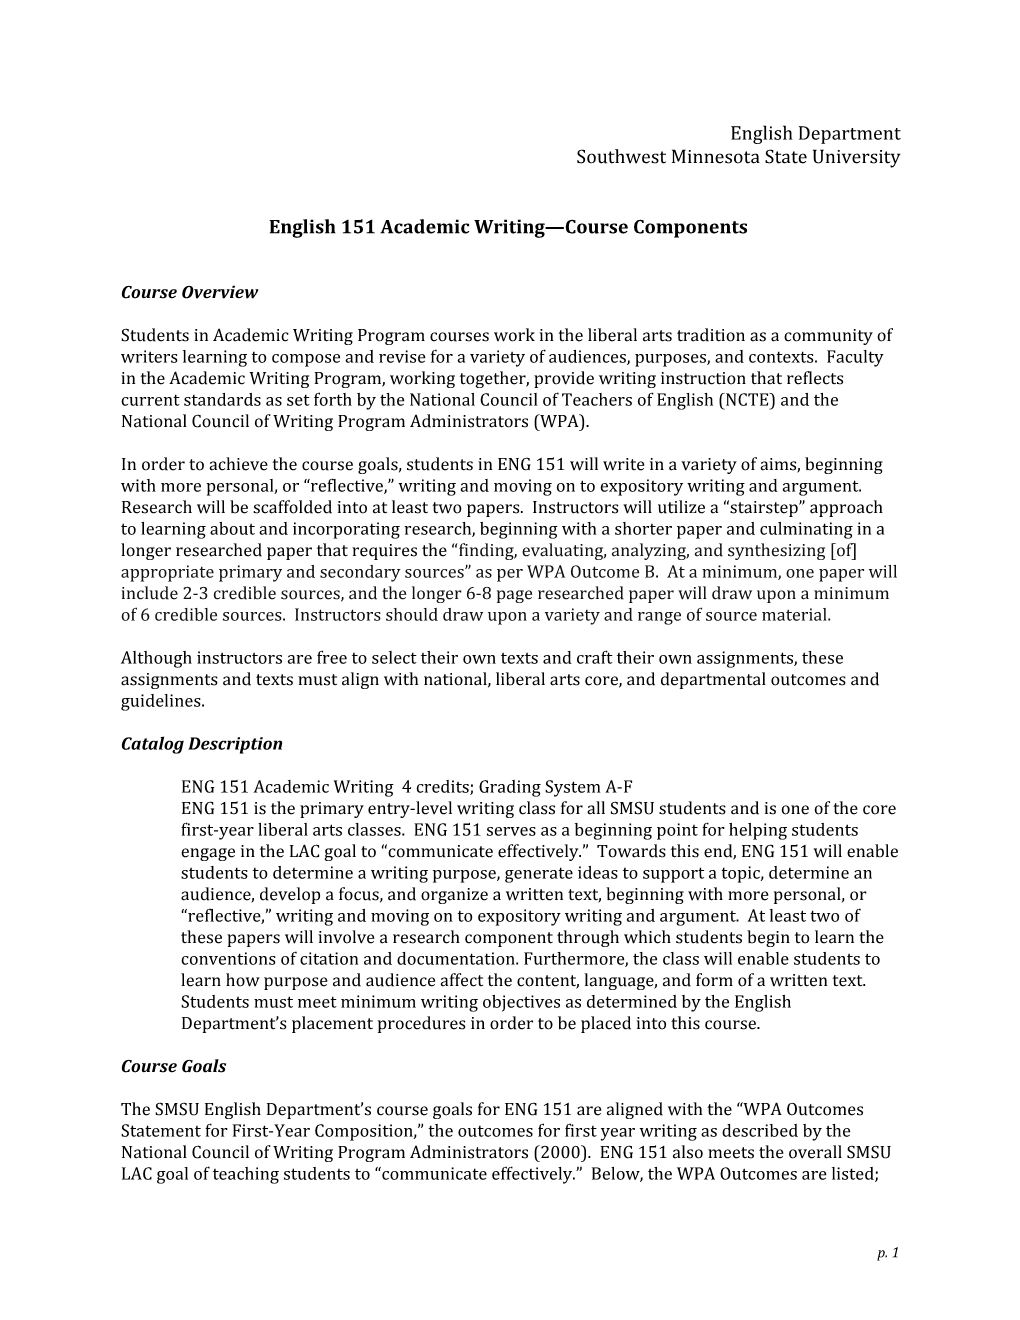 English 151 Academic Writing Course Components